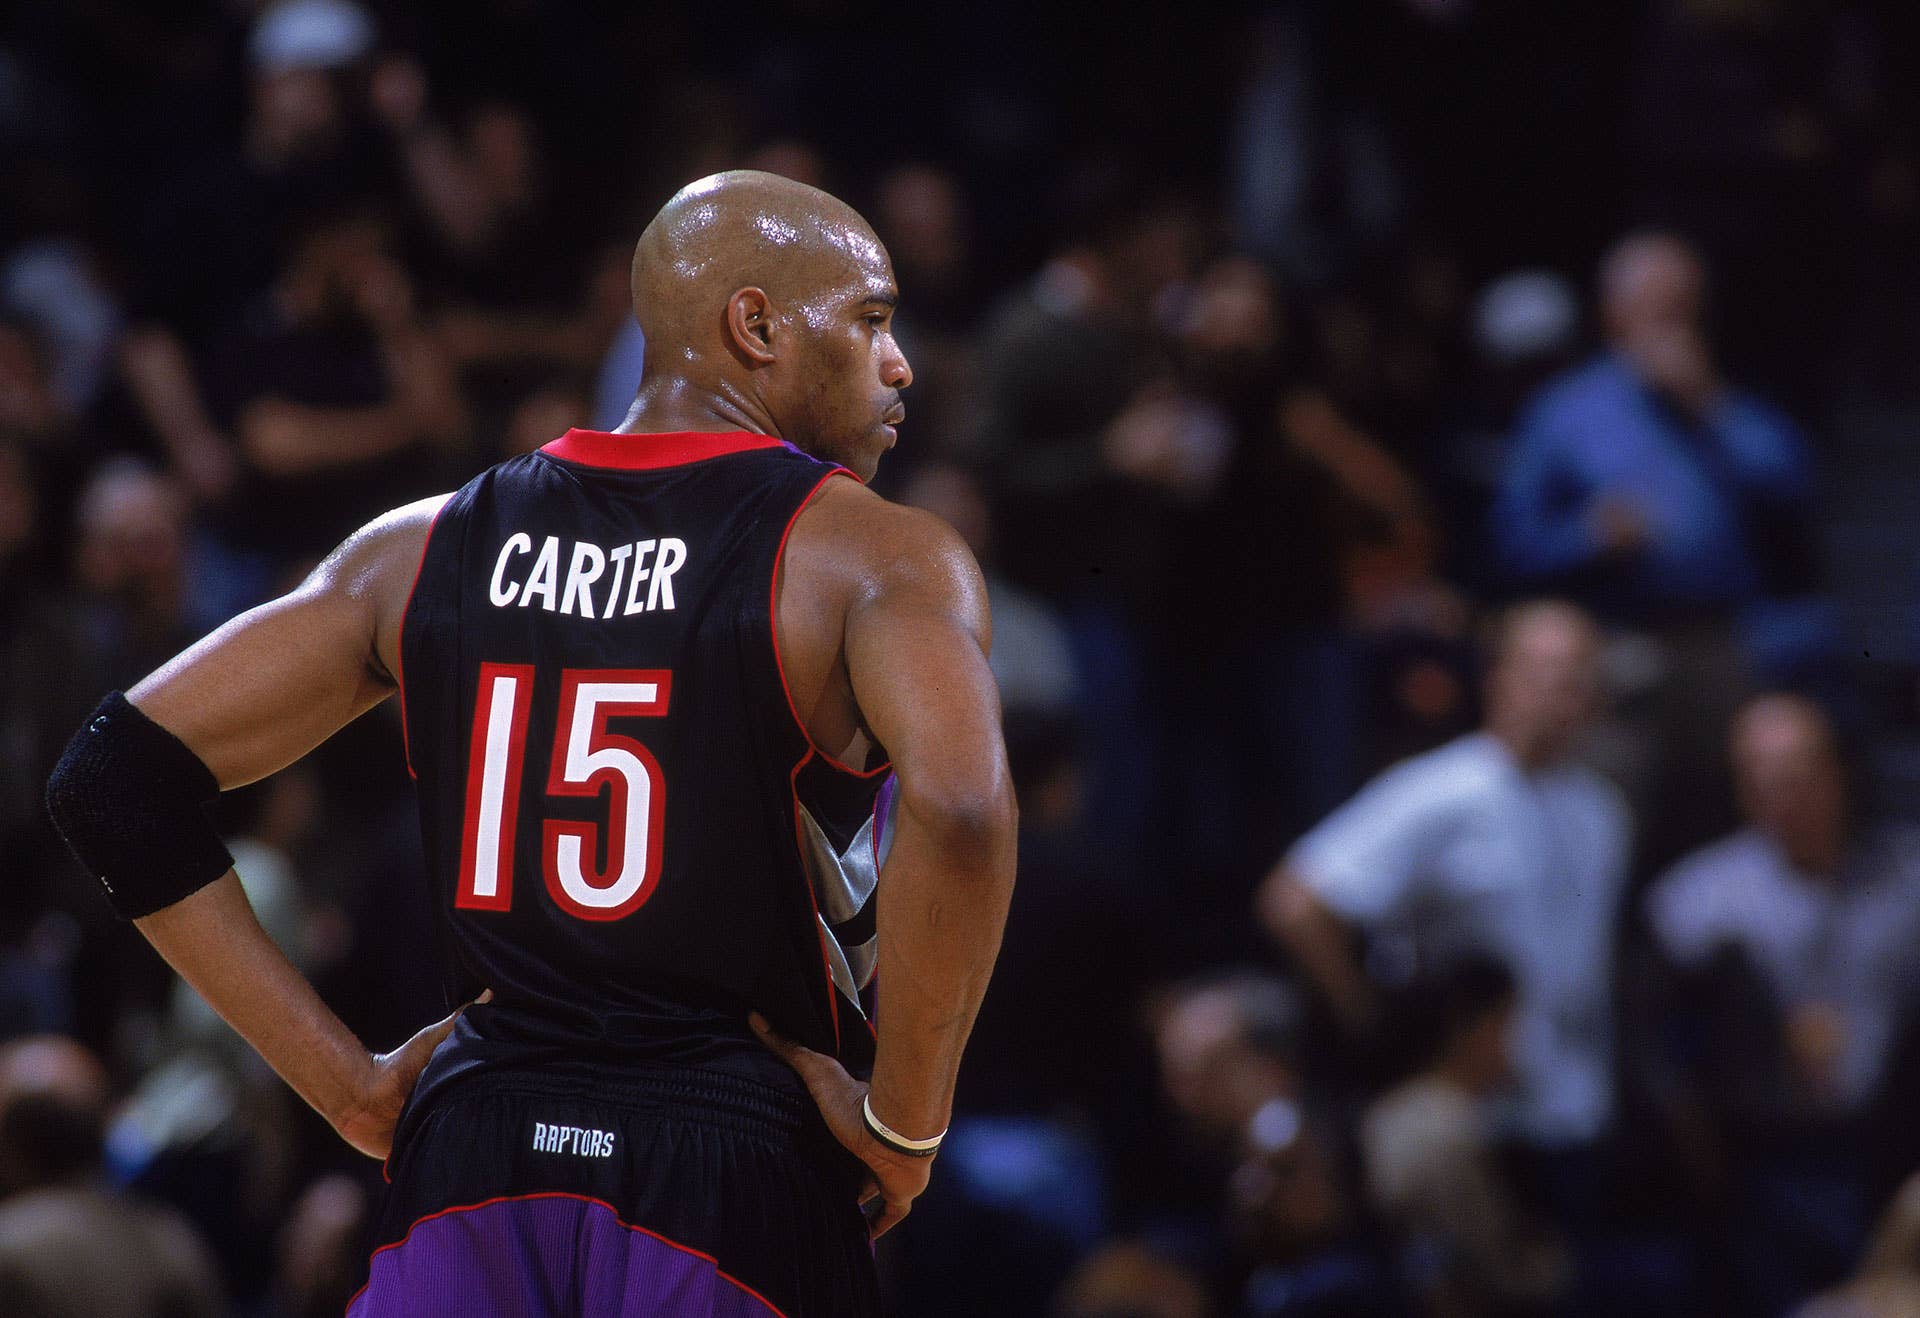 I'm doing my part.' Raptors icon Vince Carter launches scholarship